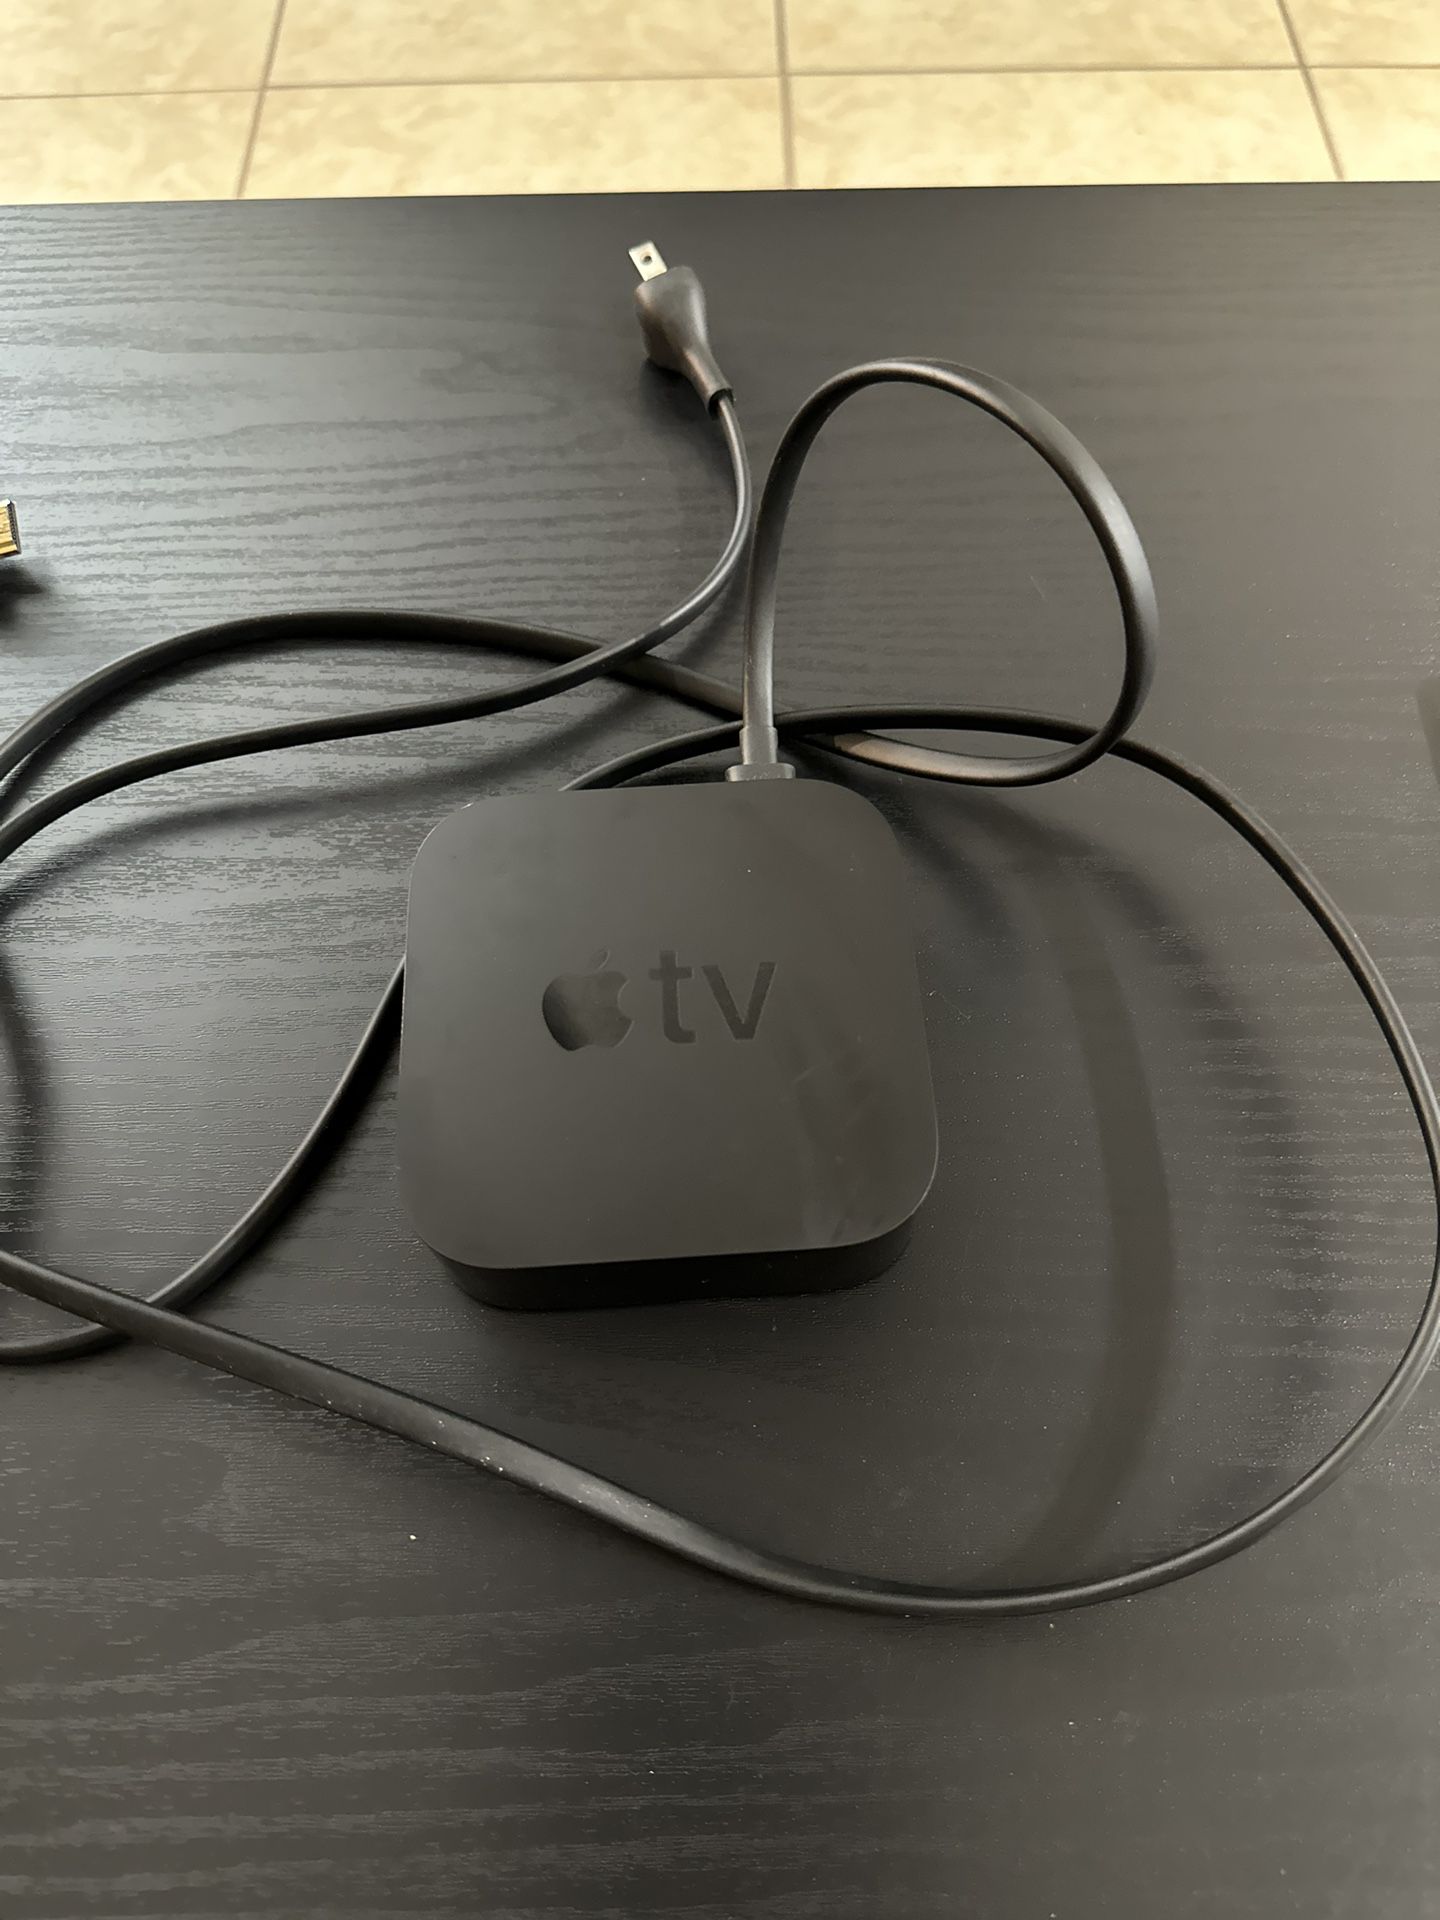 Apple TV 4K with Remote 